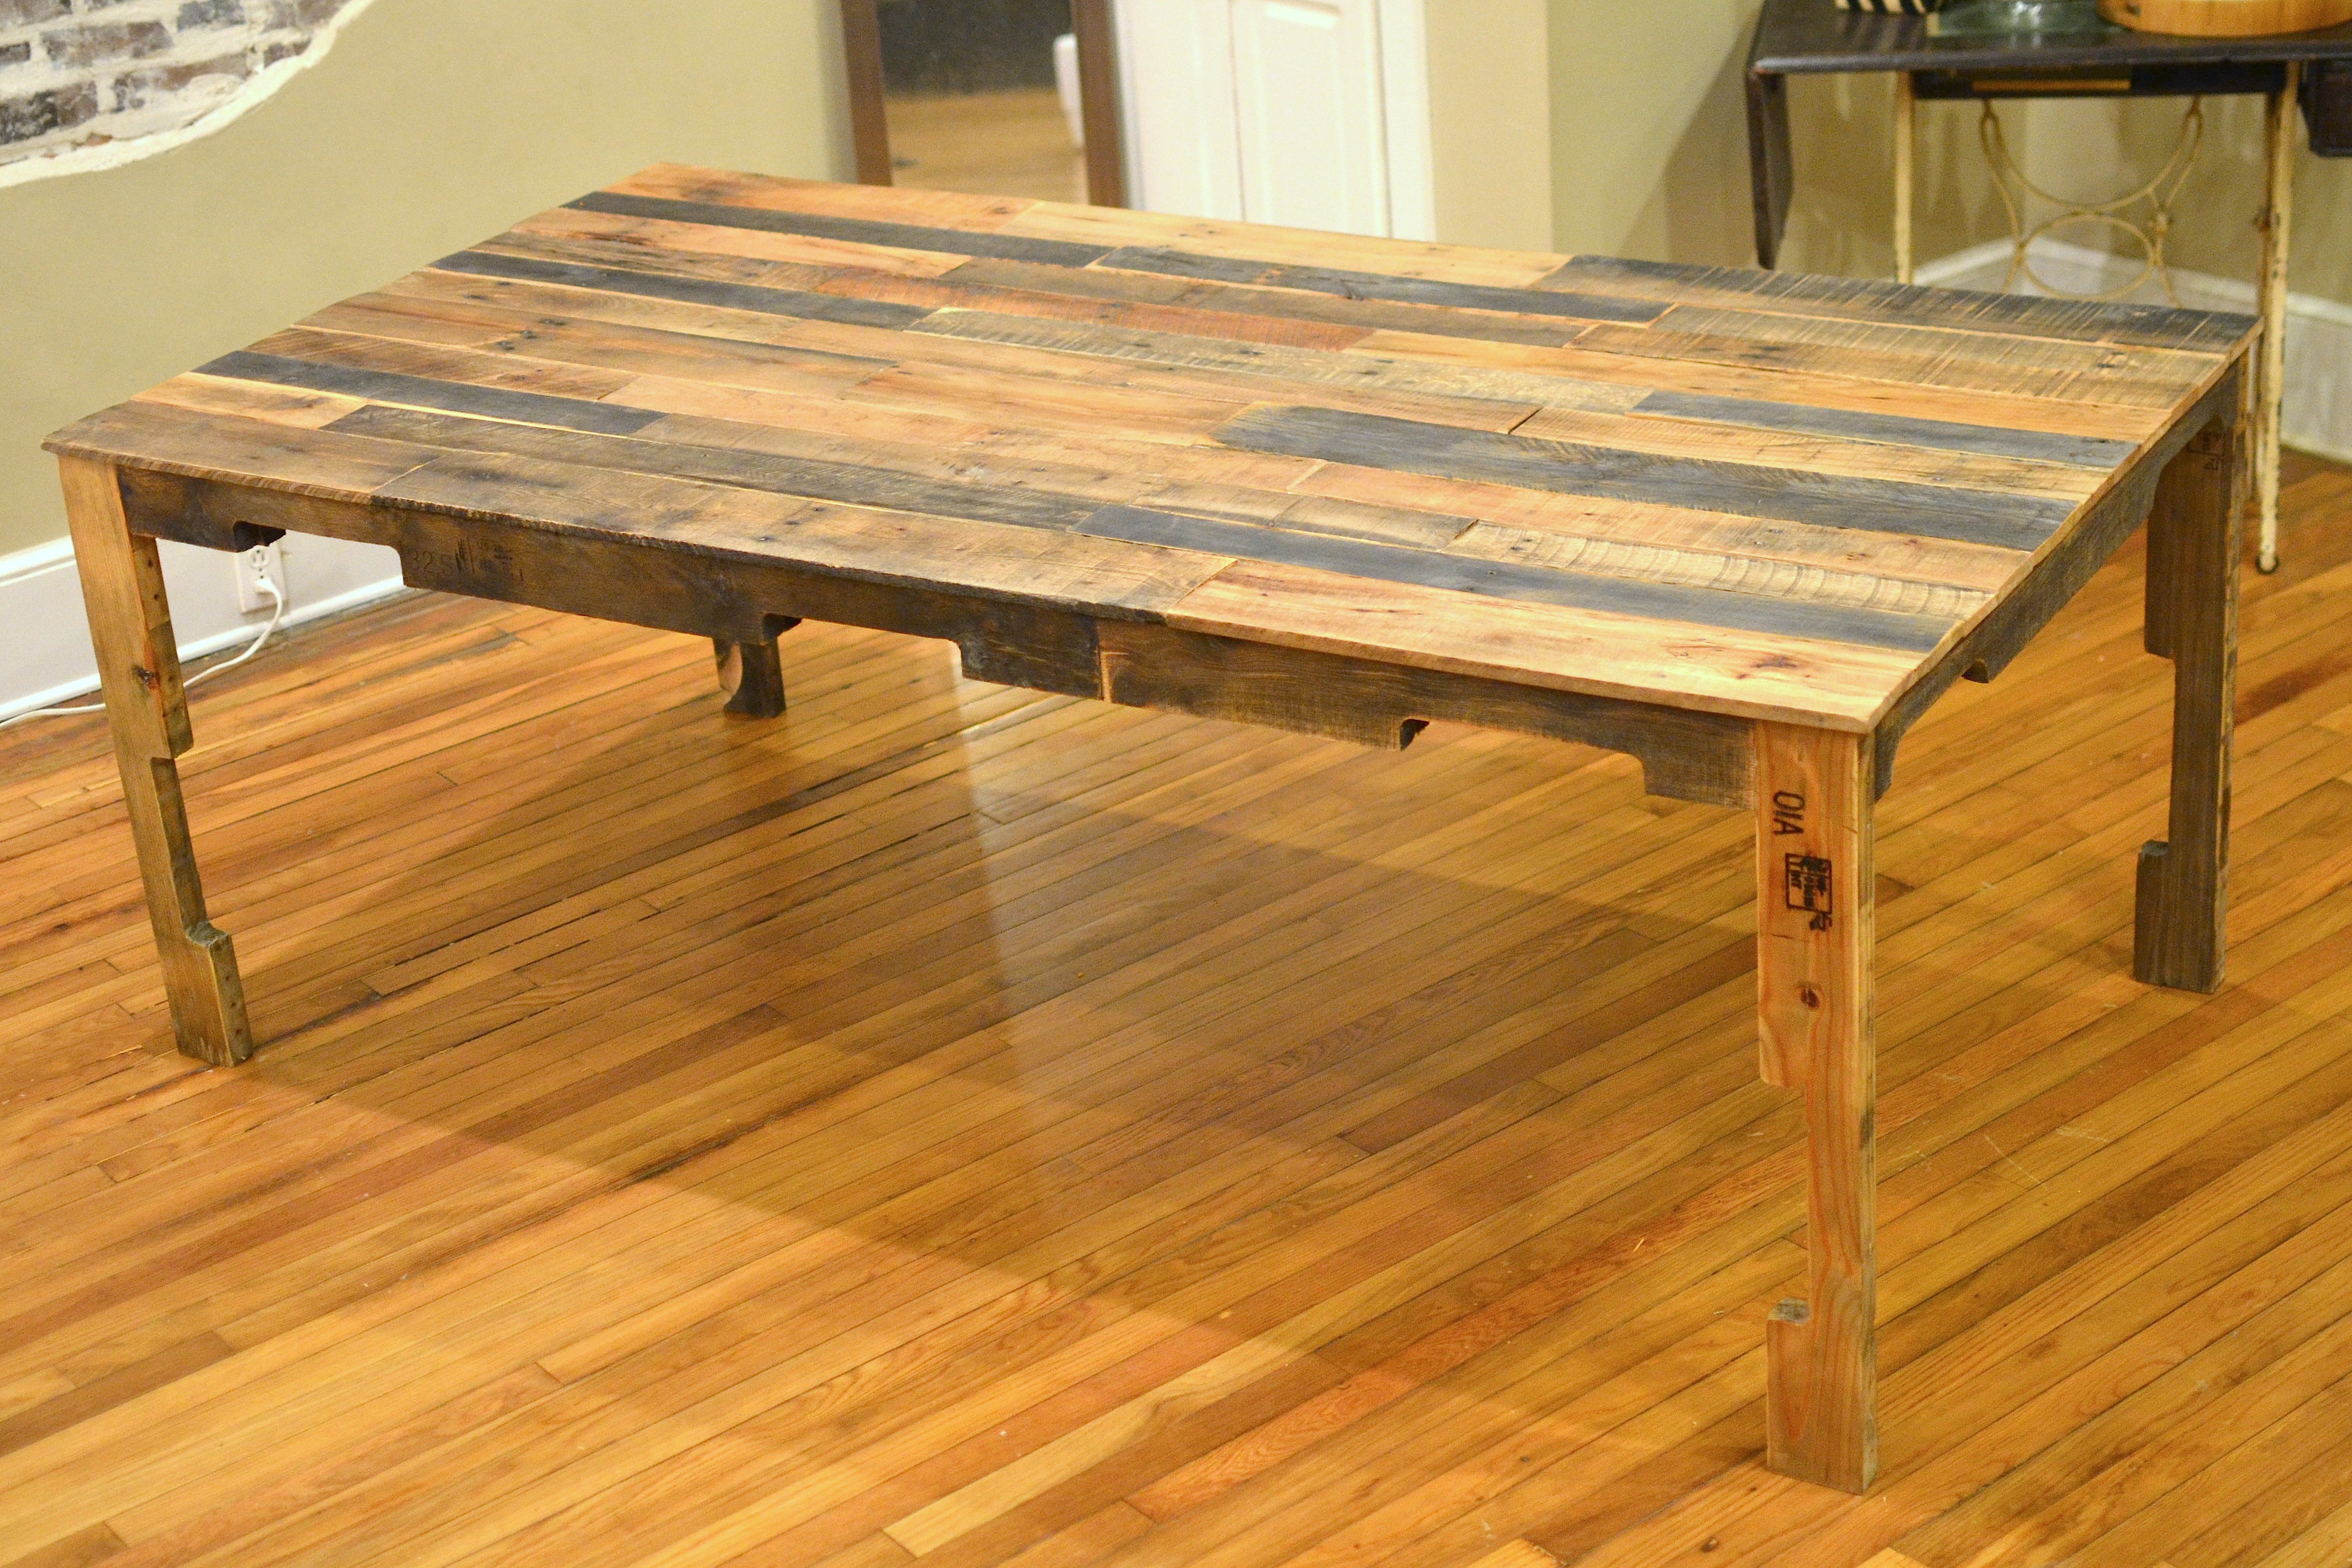 50 Beautiful Photos Of Design Decisions How To Make A Dining Room Table Out Of Pallets Wtsenatesinfo